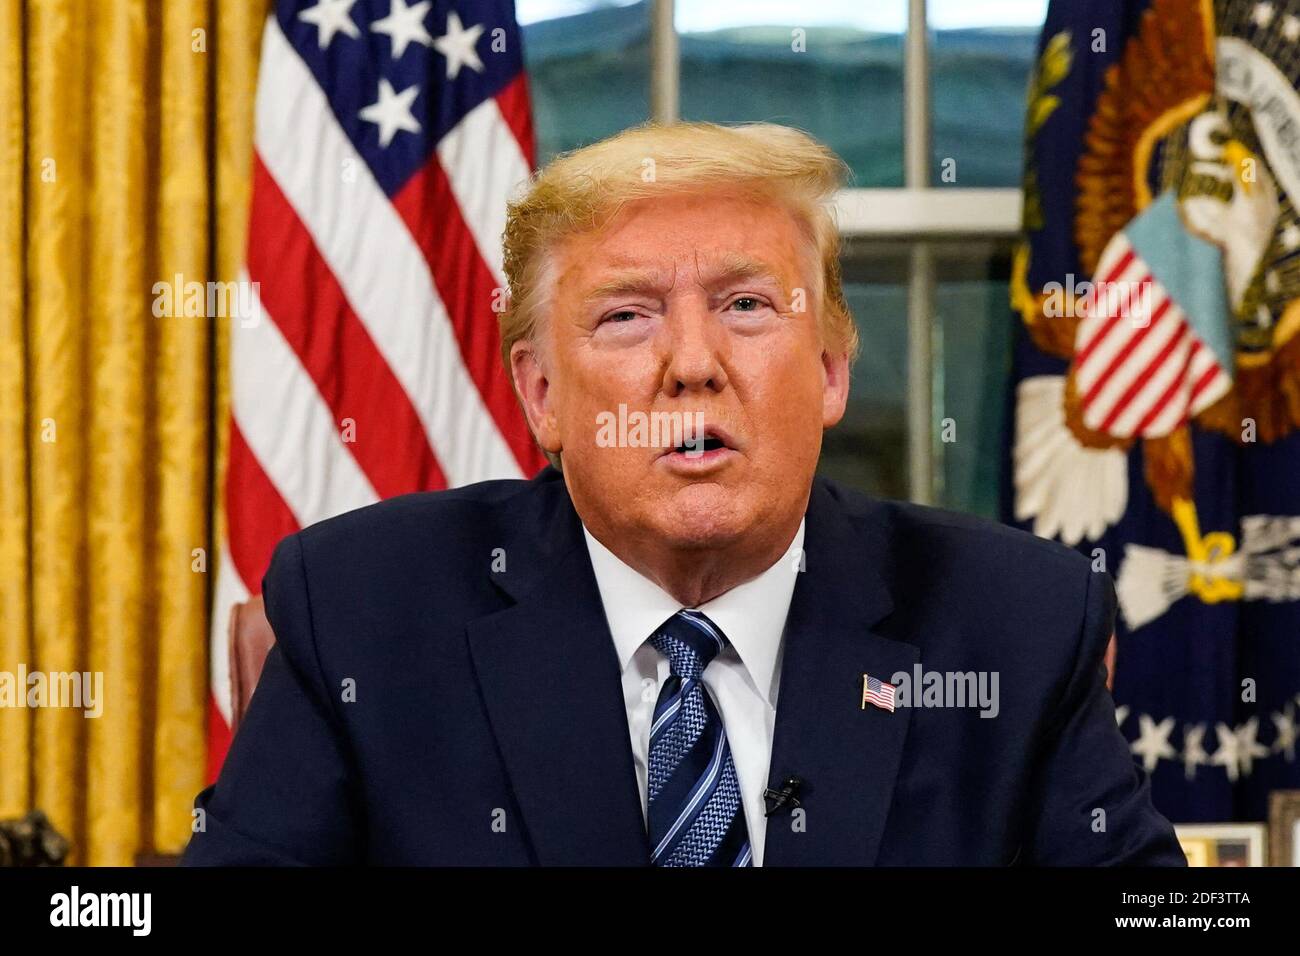 President Donald Trump addresses the Nation from the Oval Office about the widening coronavirus crisis, in Washington, DC, USA on Wednesday, March, 11, 2020. Photo by Doug Mills/The New York Times/Pool/ABACAPRESS.COM Stock Photo